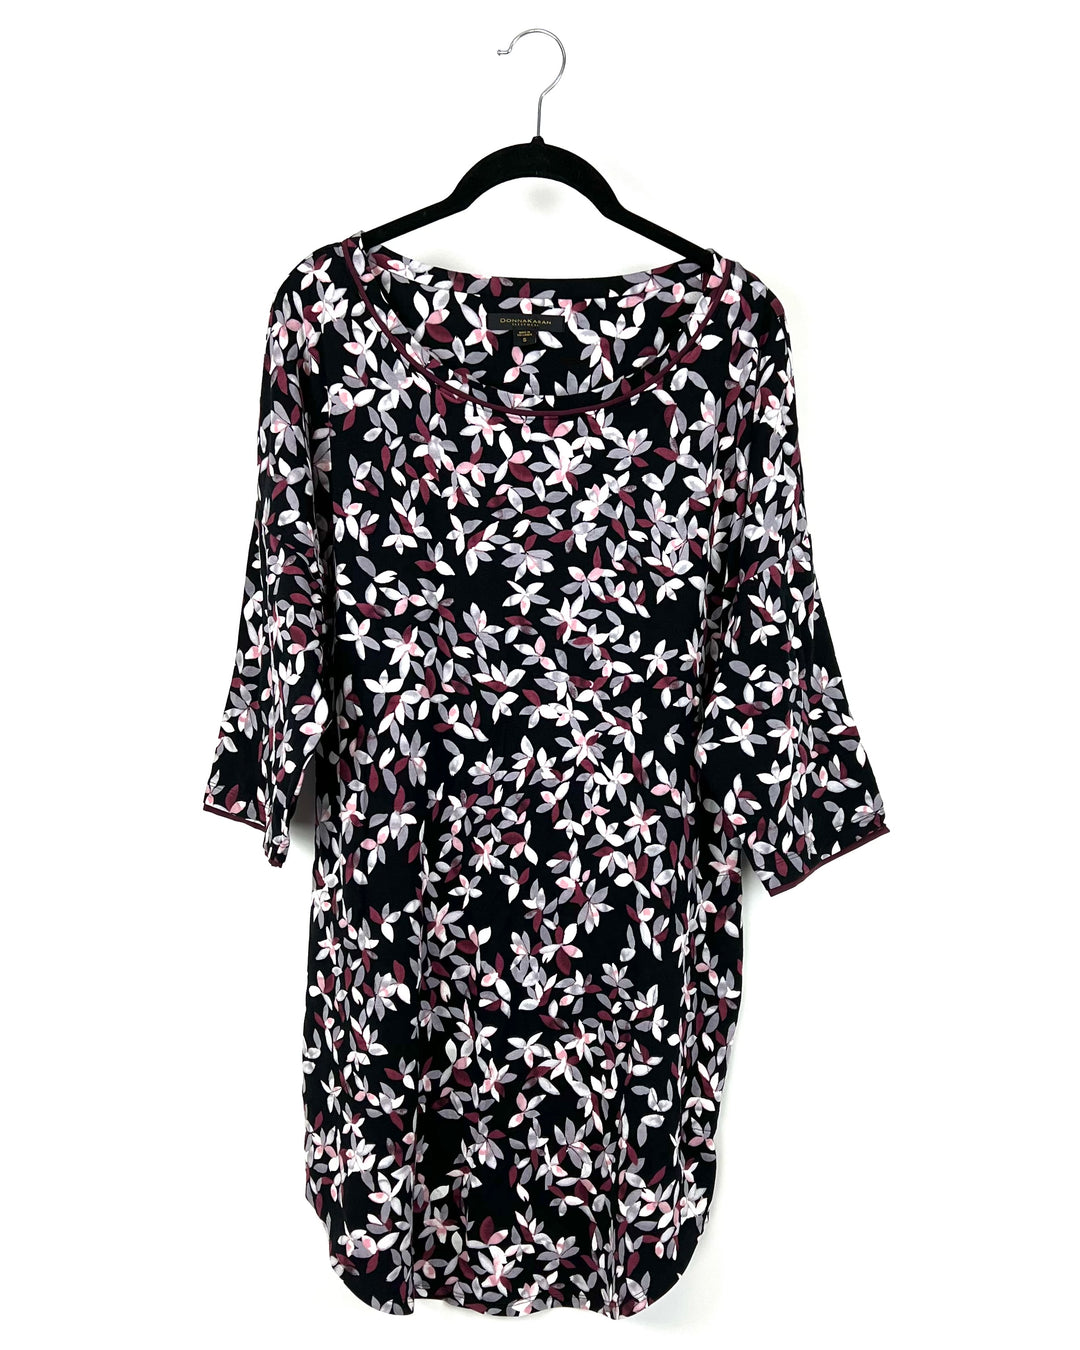 Black And Pink Floral Print Long-Sleeve Nightgown - Small